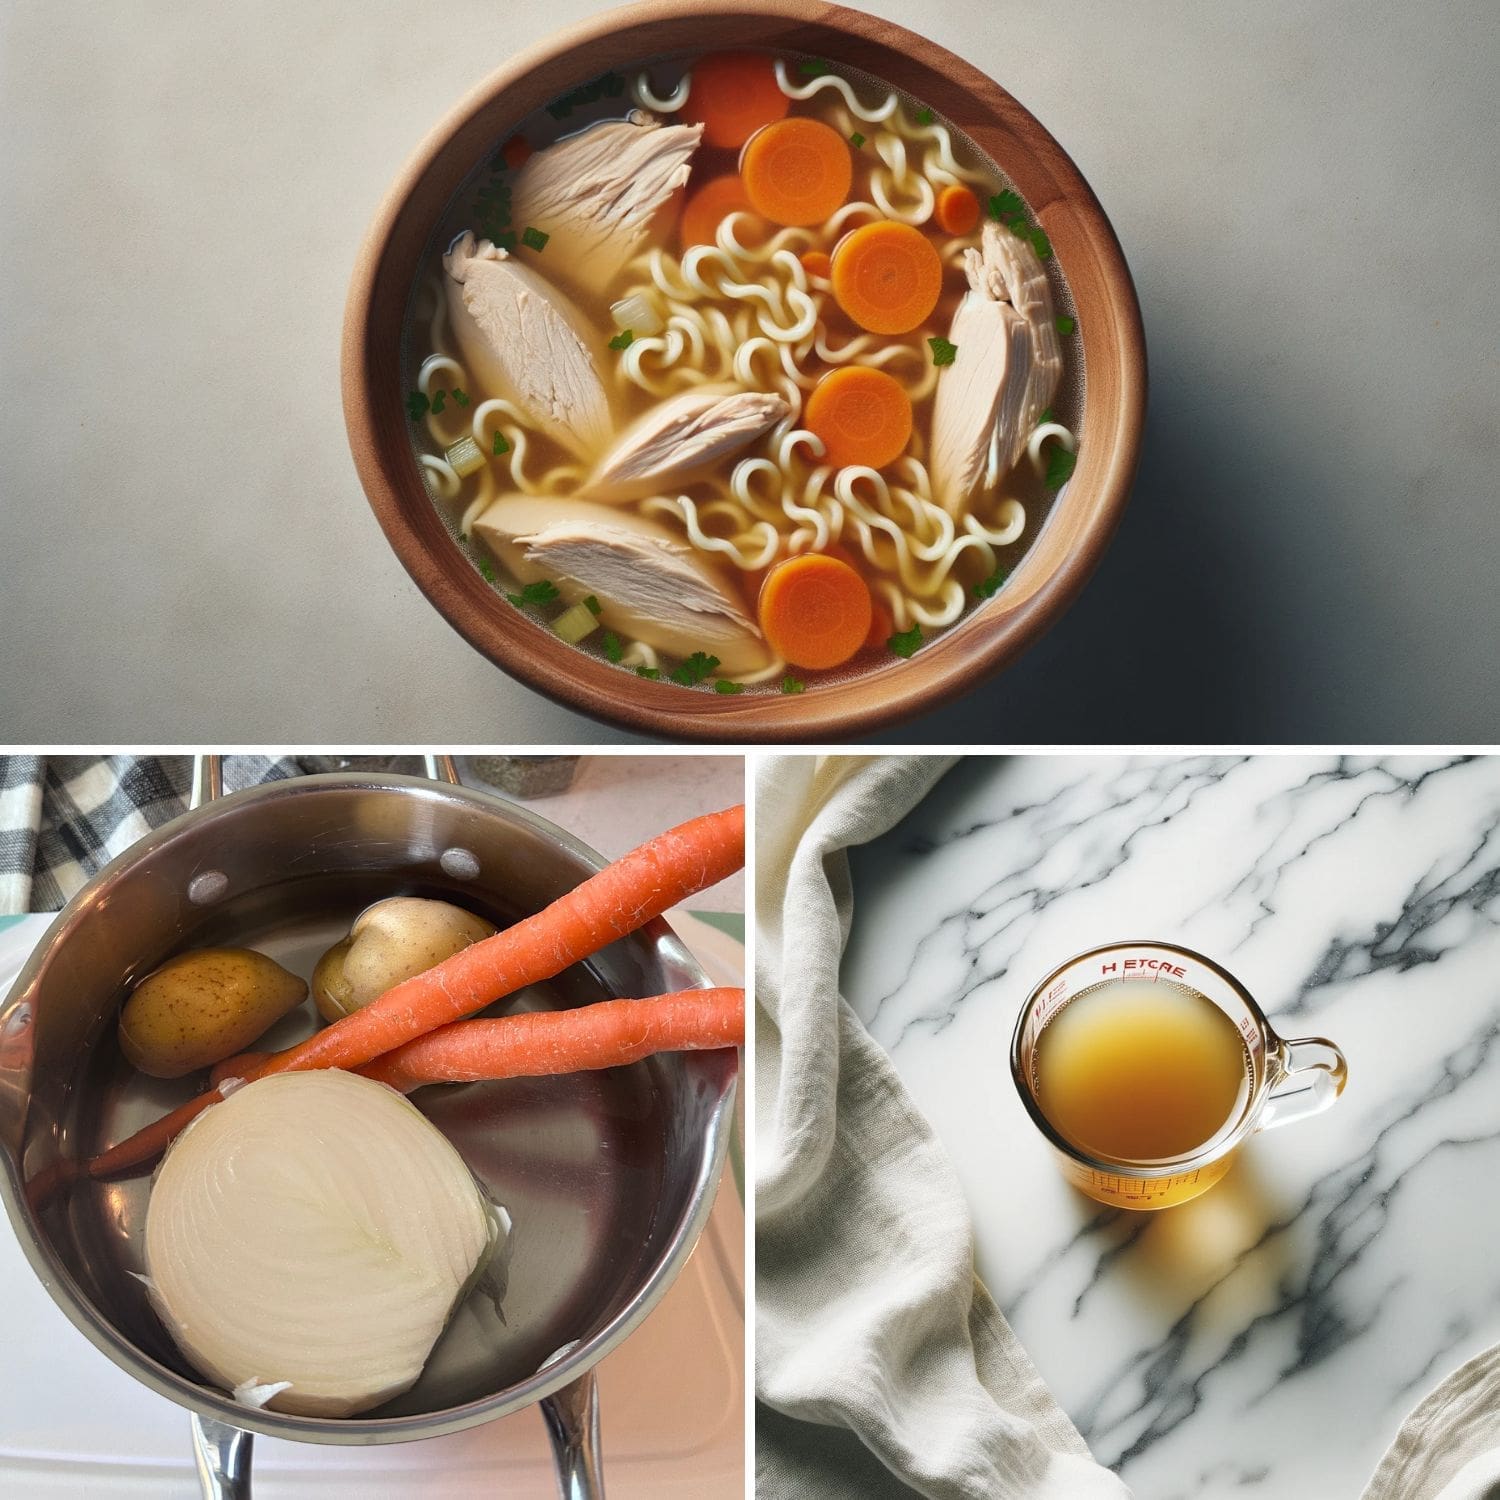 Three images collage representing chicken broth substitutes: Top shows a wooden bowl filled with chicken noodle soup, sliced carrots, and parsley. Bottom-left features a pot with fresh potatoes, carrots, and an onion on a checkered cloth. Bottom-right depicts a clear glass mug of chicken broth on a marble surface with draped cloth